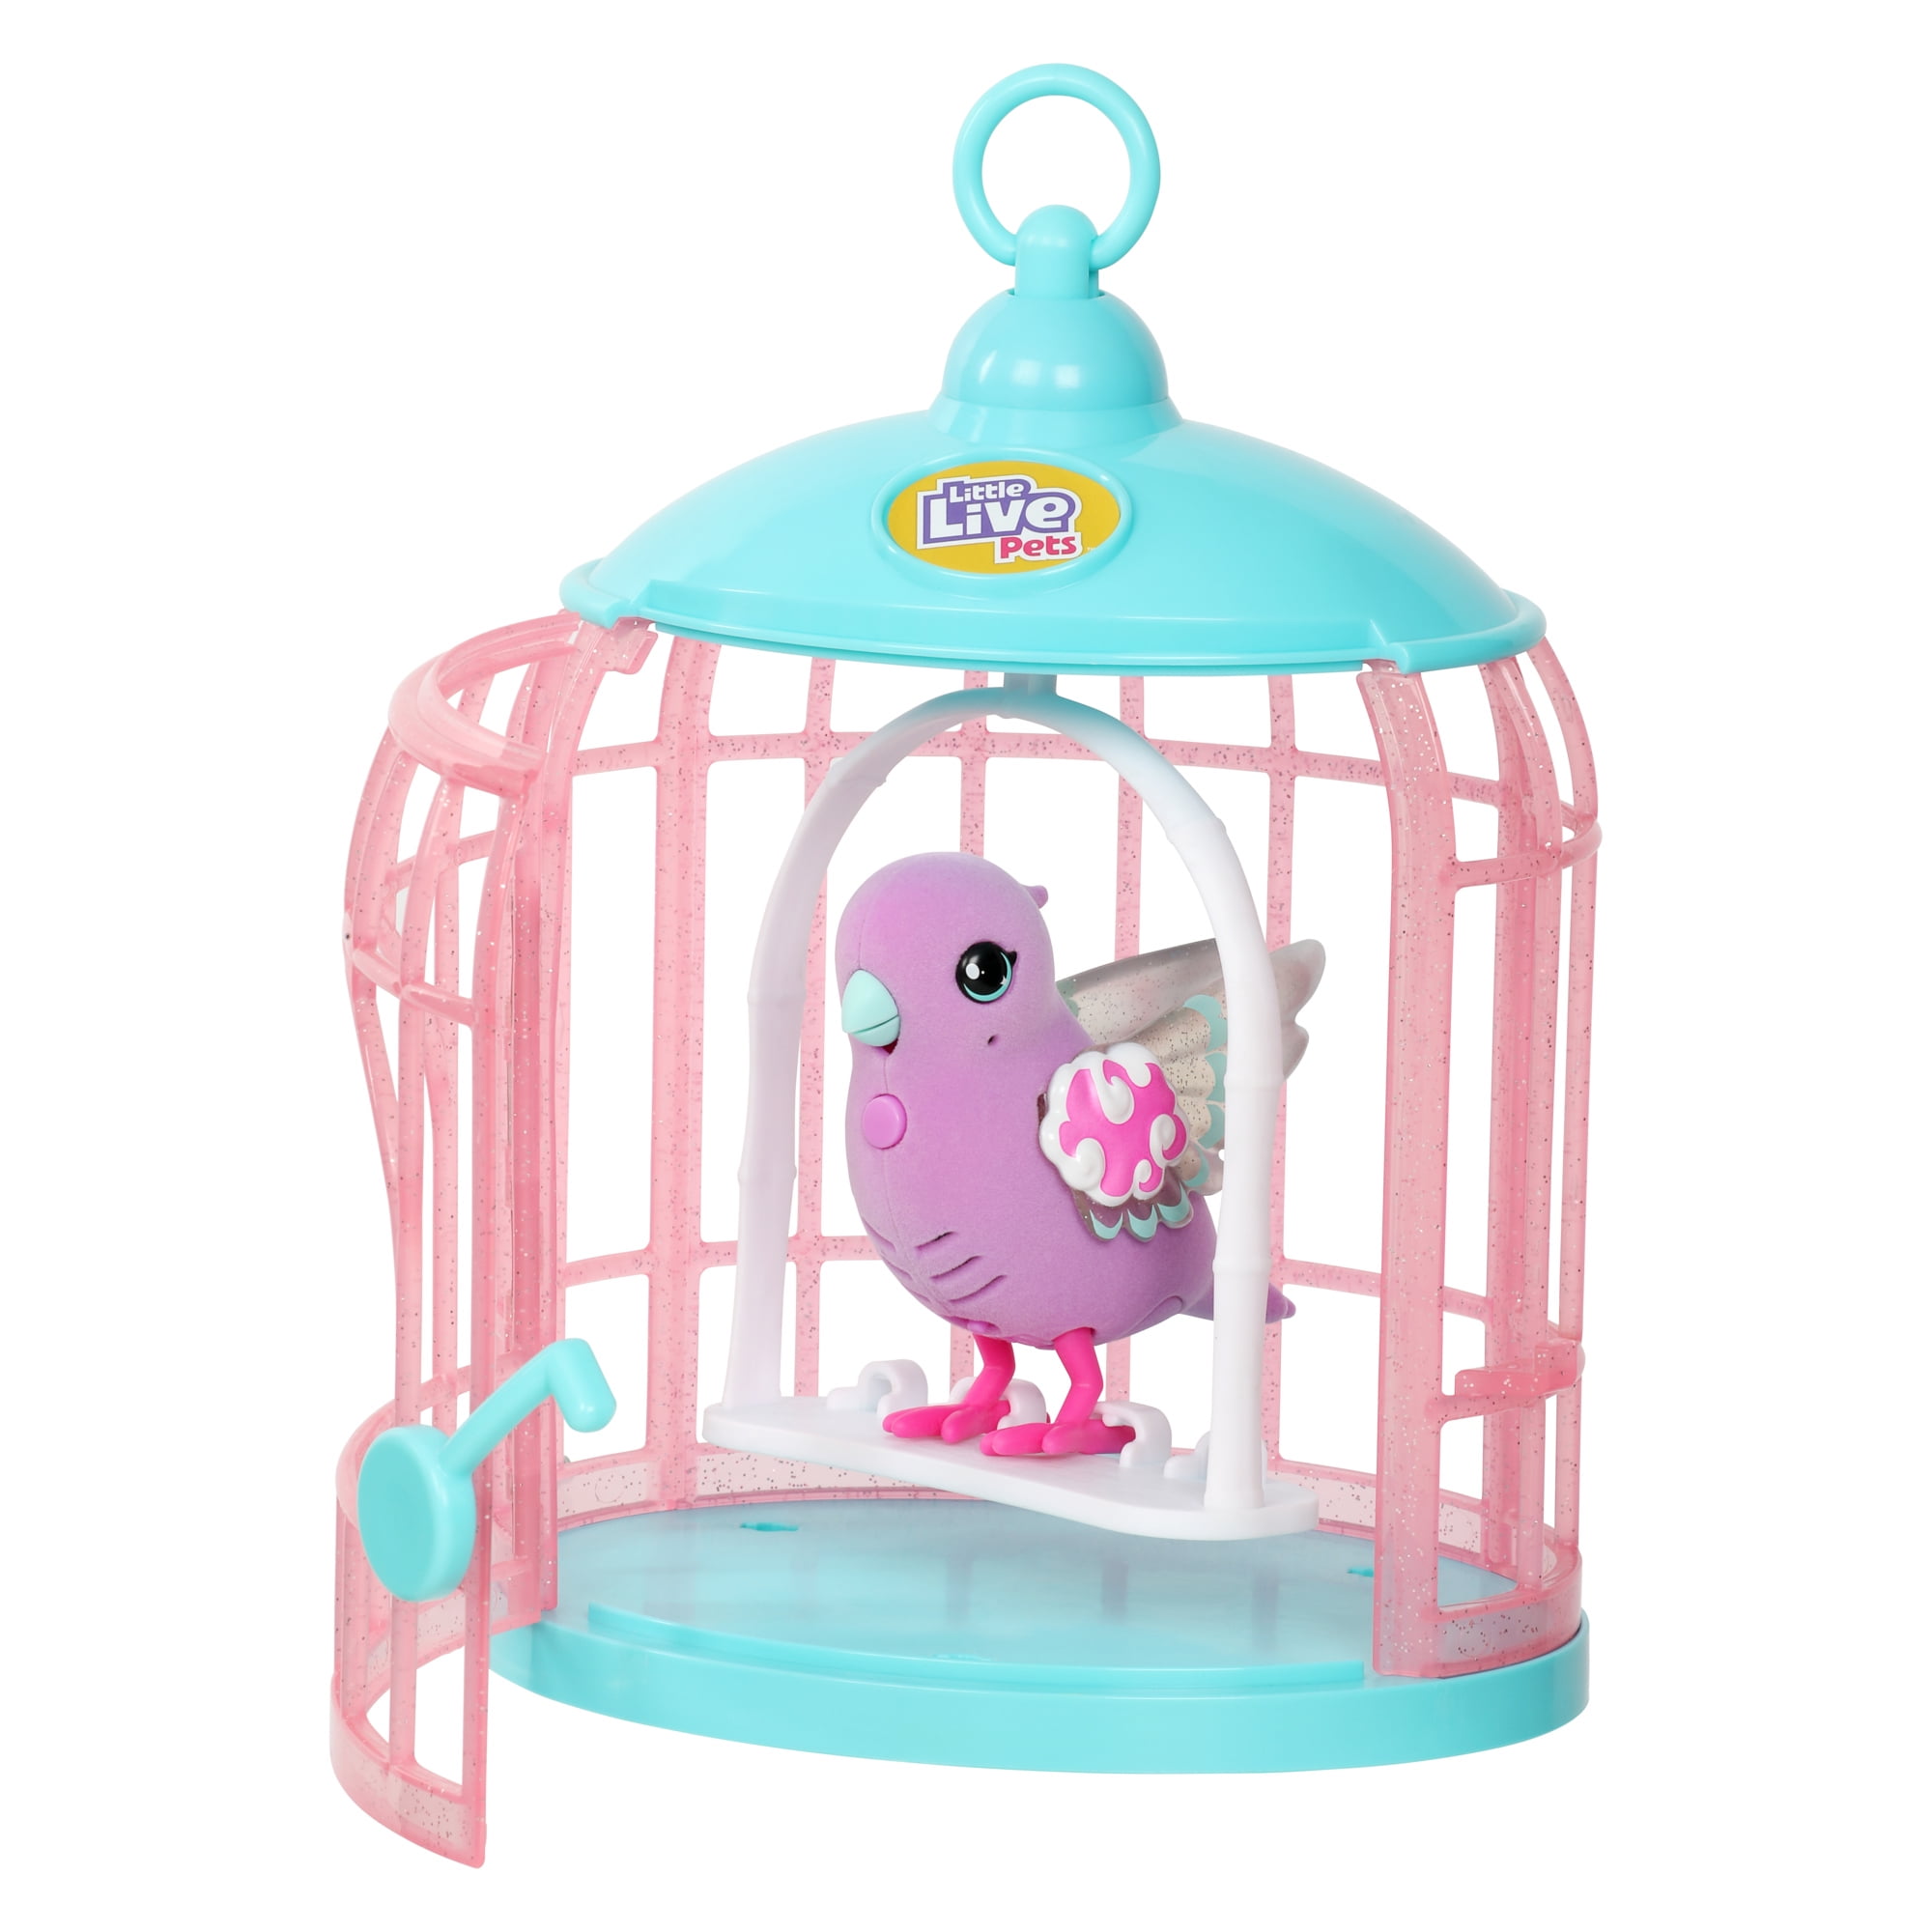 Little Live Pets, Lil' Bird & Bird Cage: Polly Pearl, Pet, Playset, Interactive Toys, Ages 5+